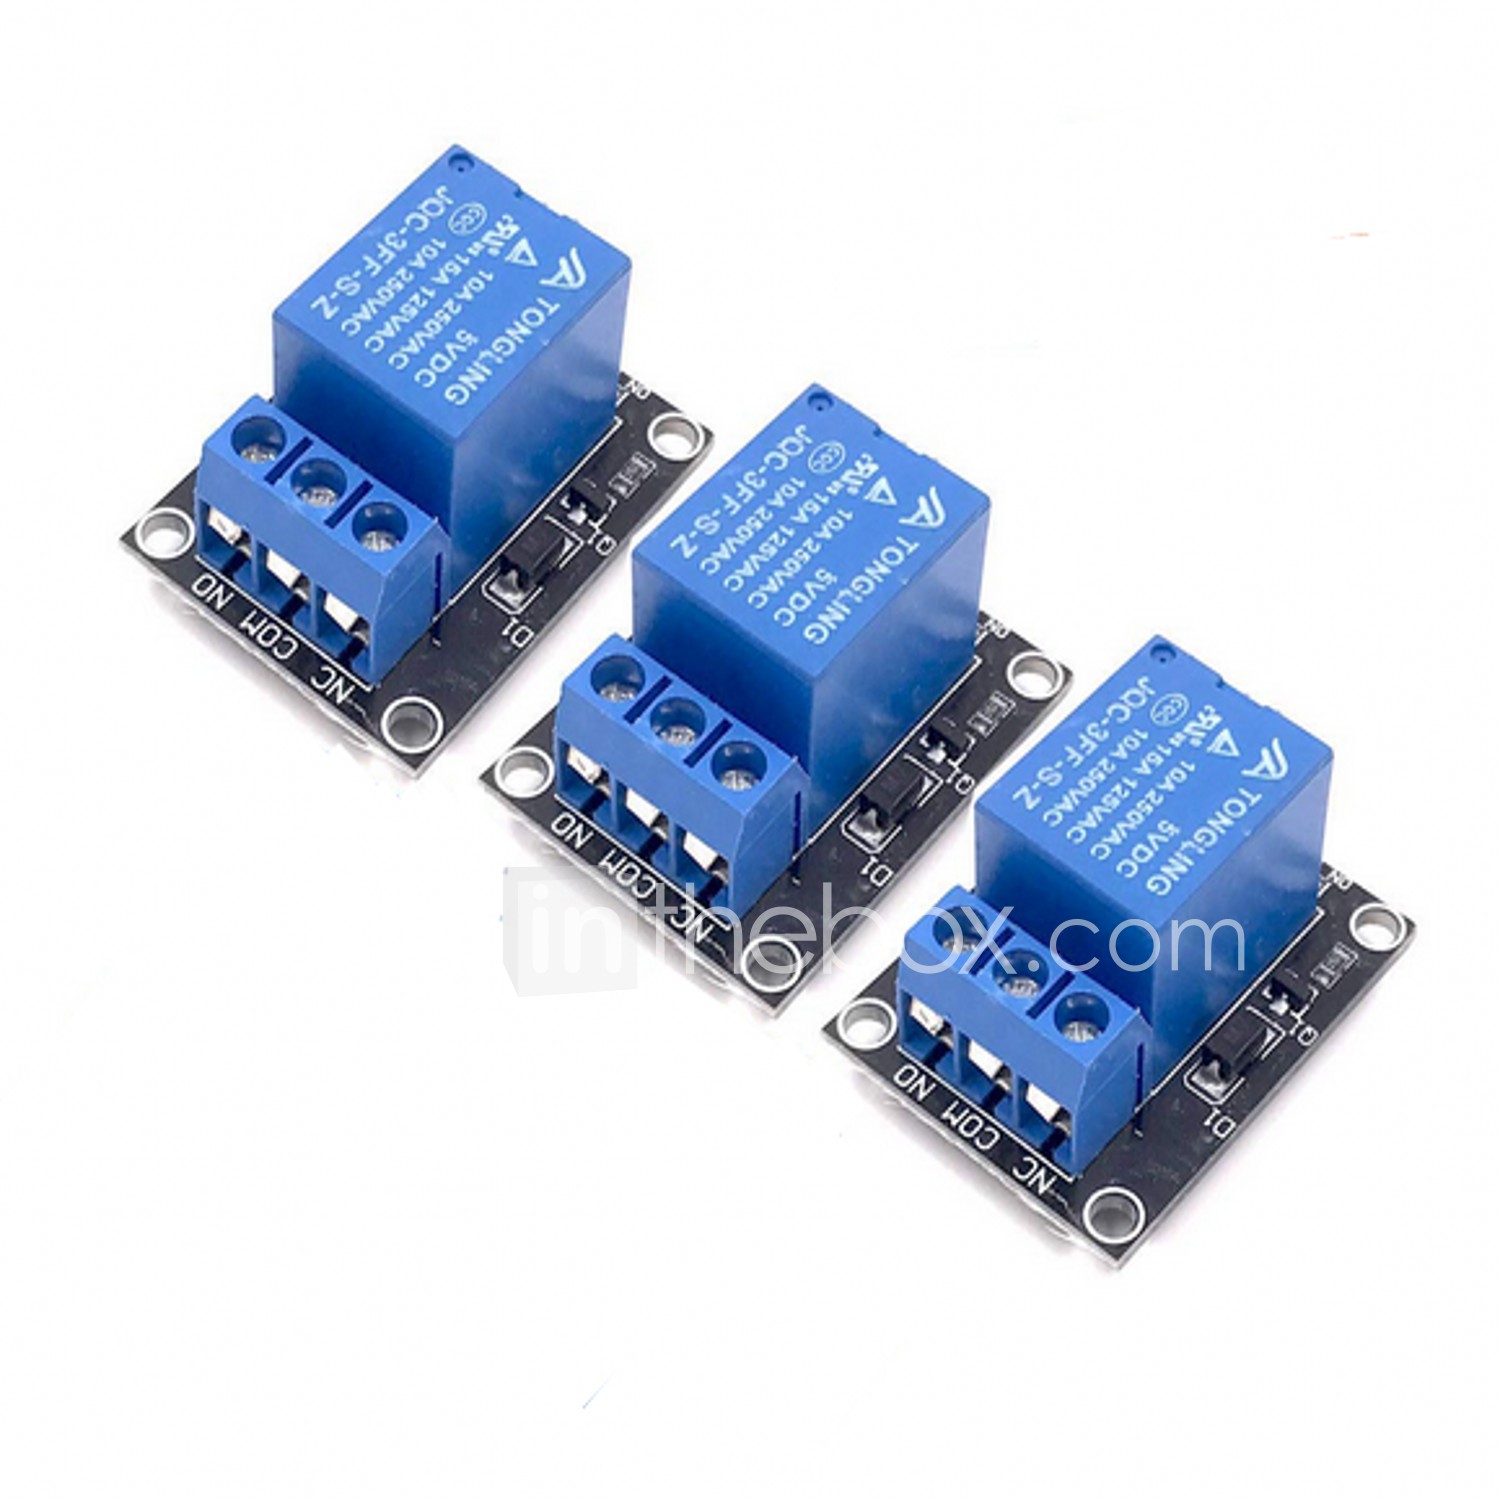 DC 5V Indicator Light LED Two 2-Channel Relay Module Arduino ARM PIC AVR DSP